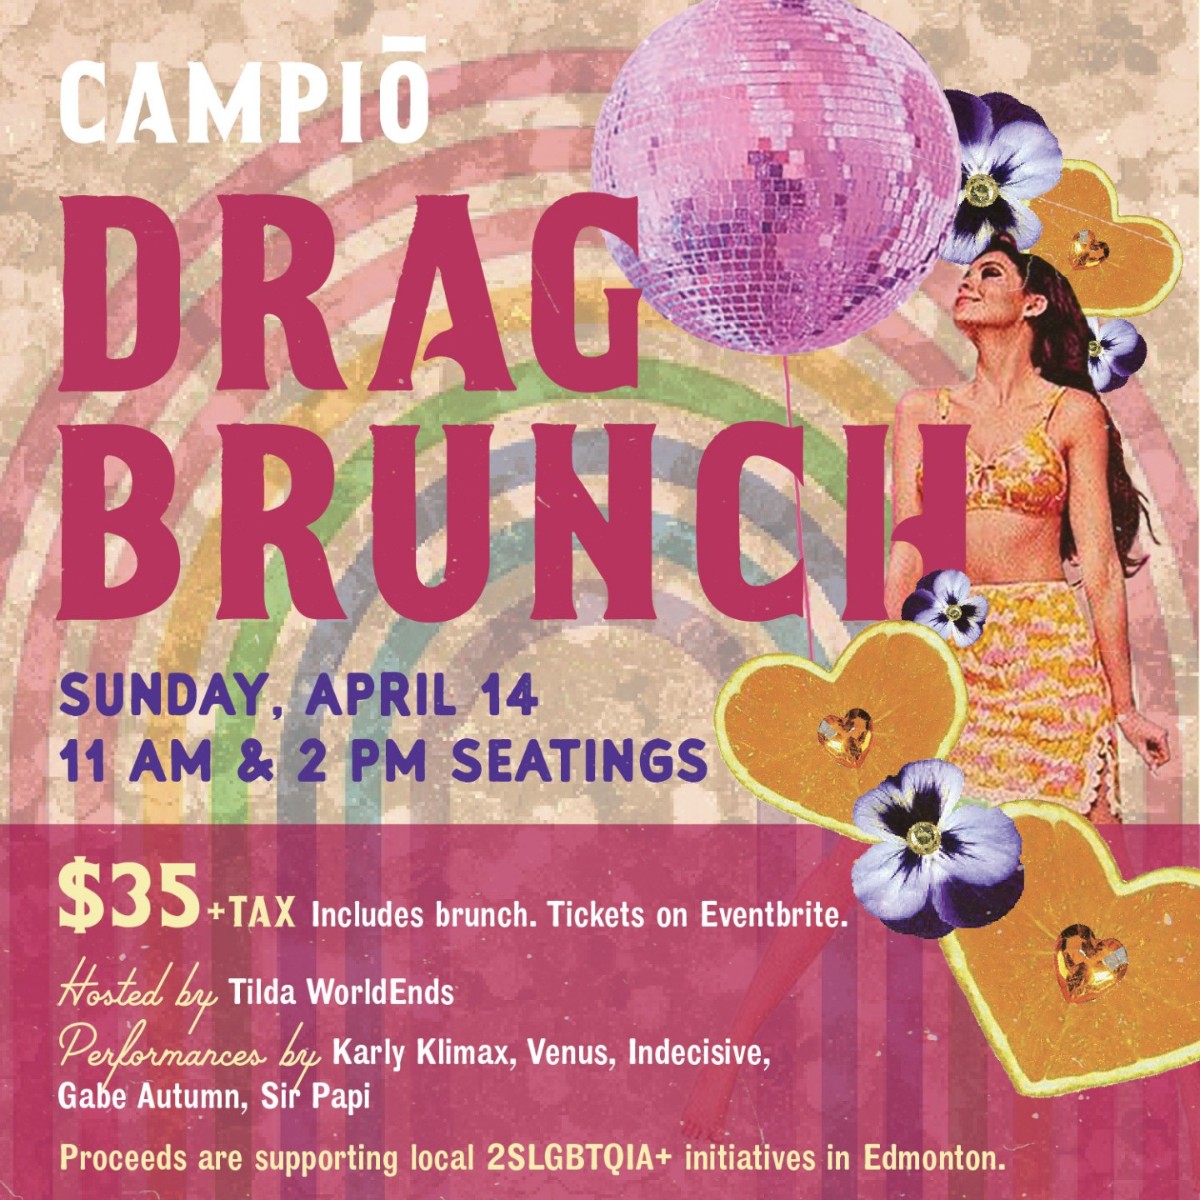 🍻 Hey brunch lovers! Get ready to sashay your way to Campio for Drag Brunch on Sunday, April 14th! ✨ Grab your tickets before they're gone: brnw.ch/21wIjuF 🏳️‍🌈 All proceeds will be donated to local 2SLGBTQIA+ initiatives.